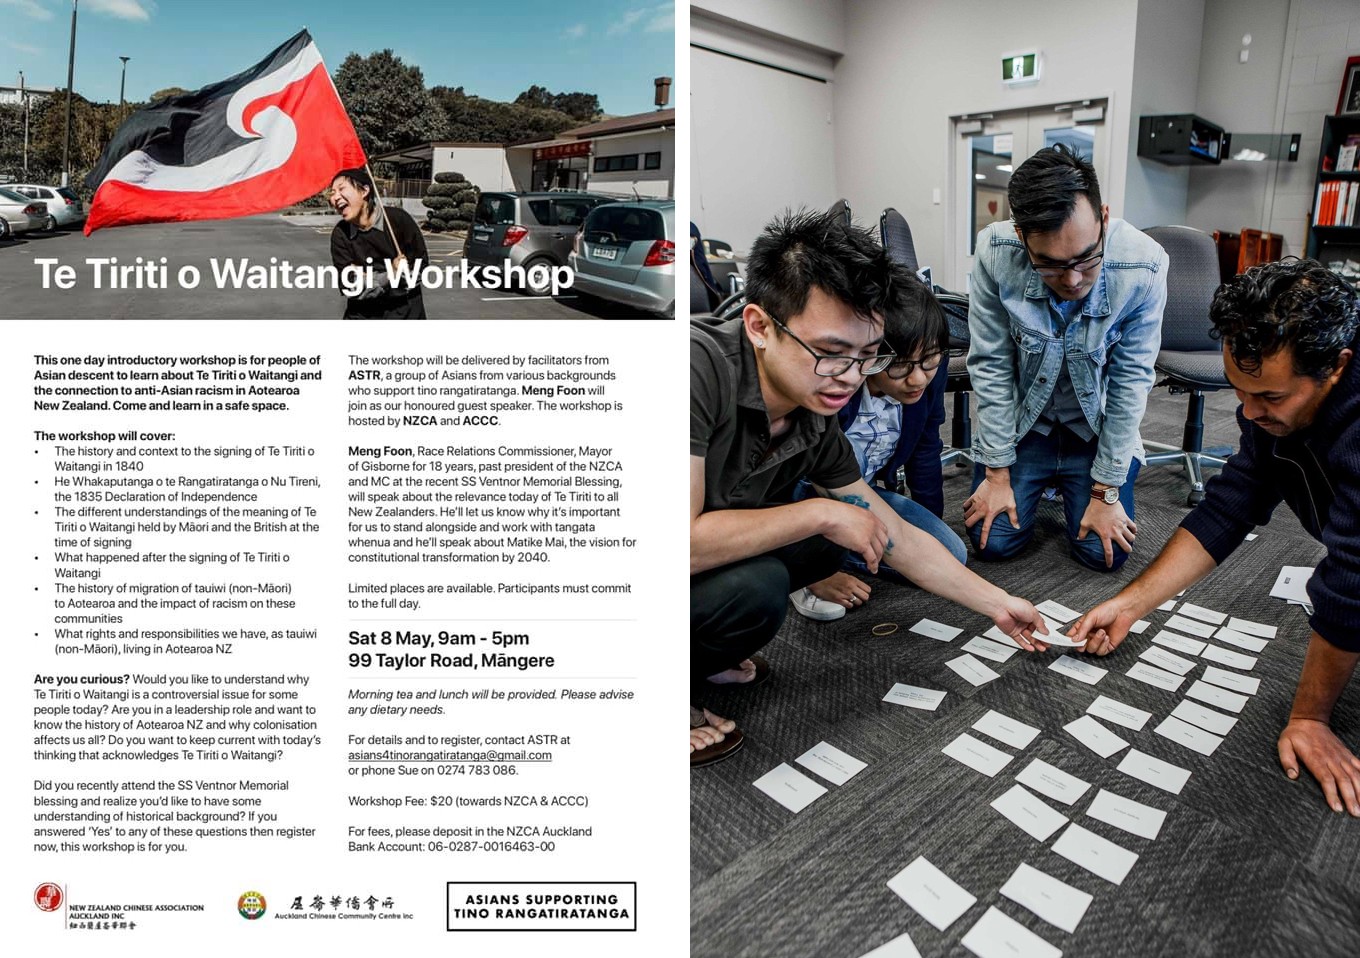 A flyer with information about an upcoming Te Tiriti workshop and a photo of Asian people engaged in a group activity with cards at a workshop.